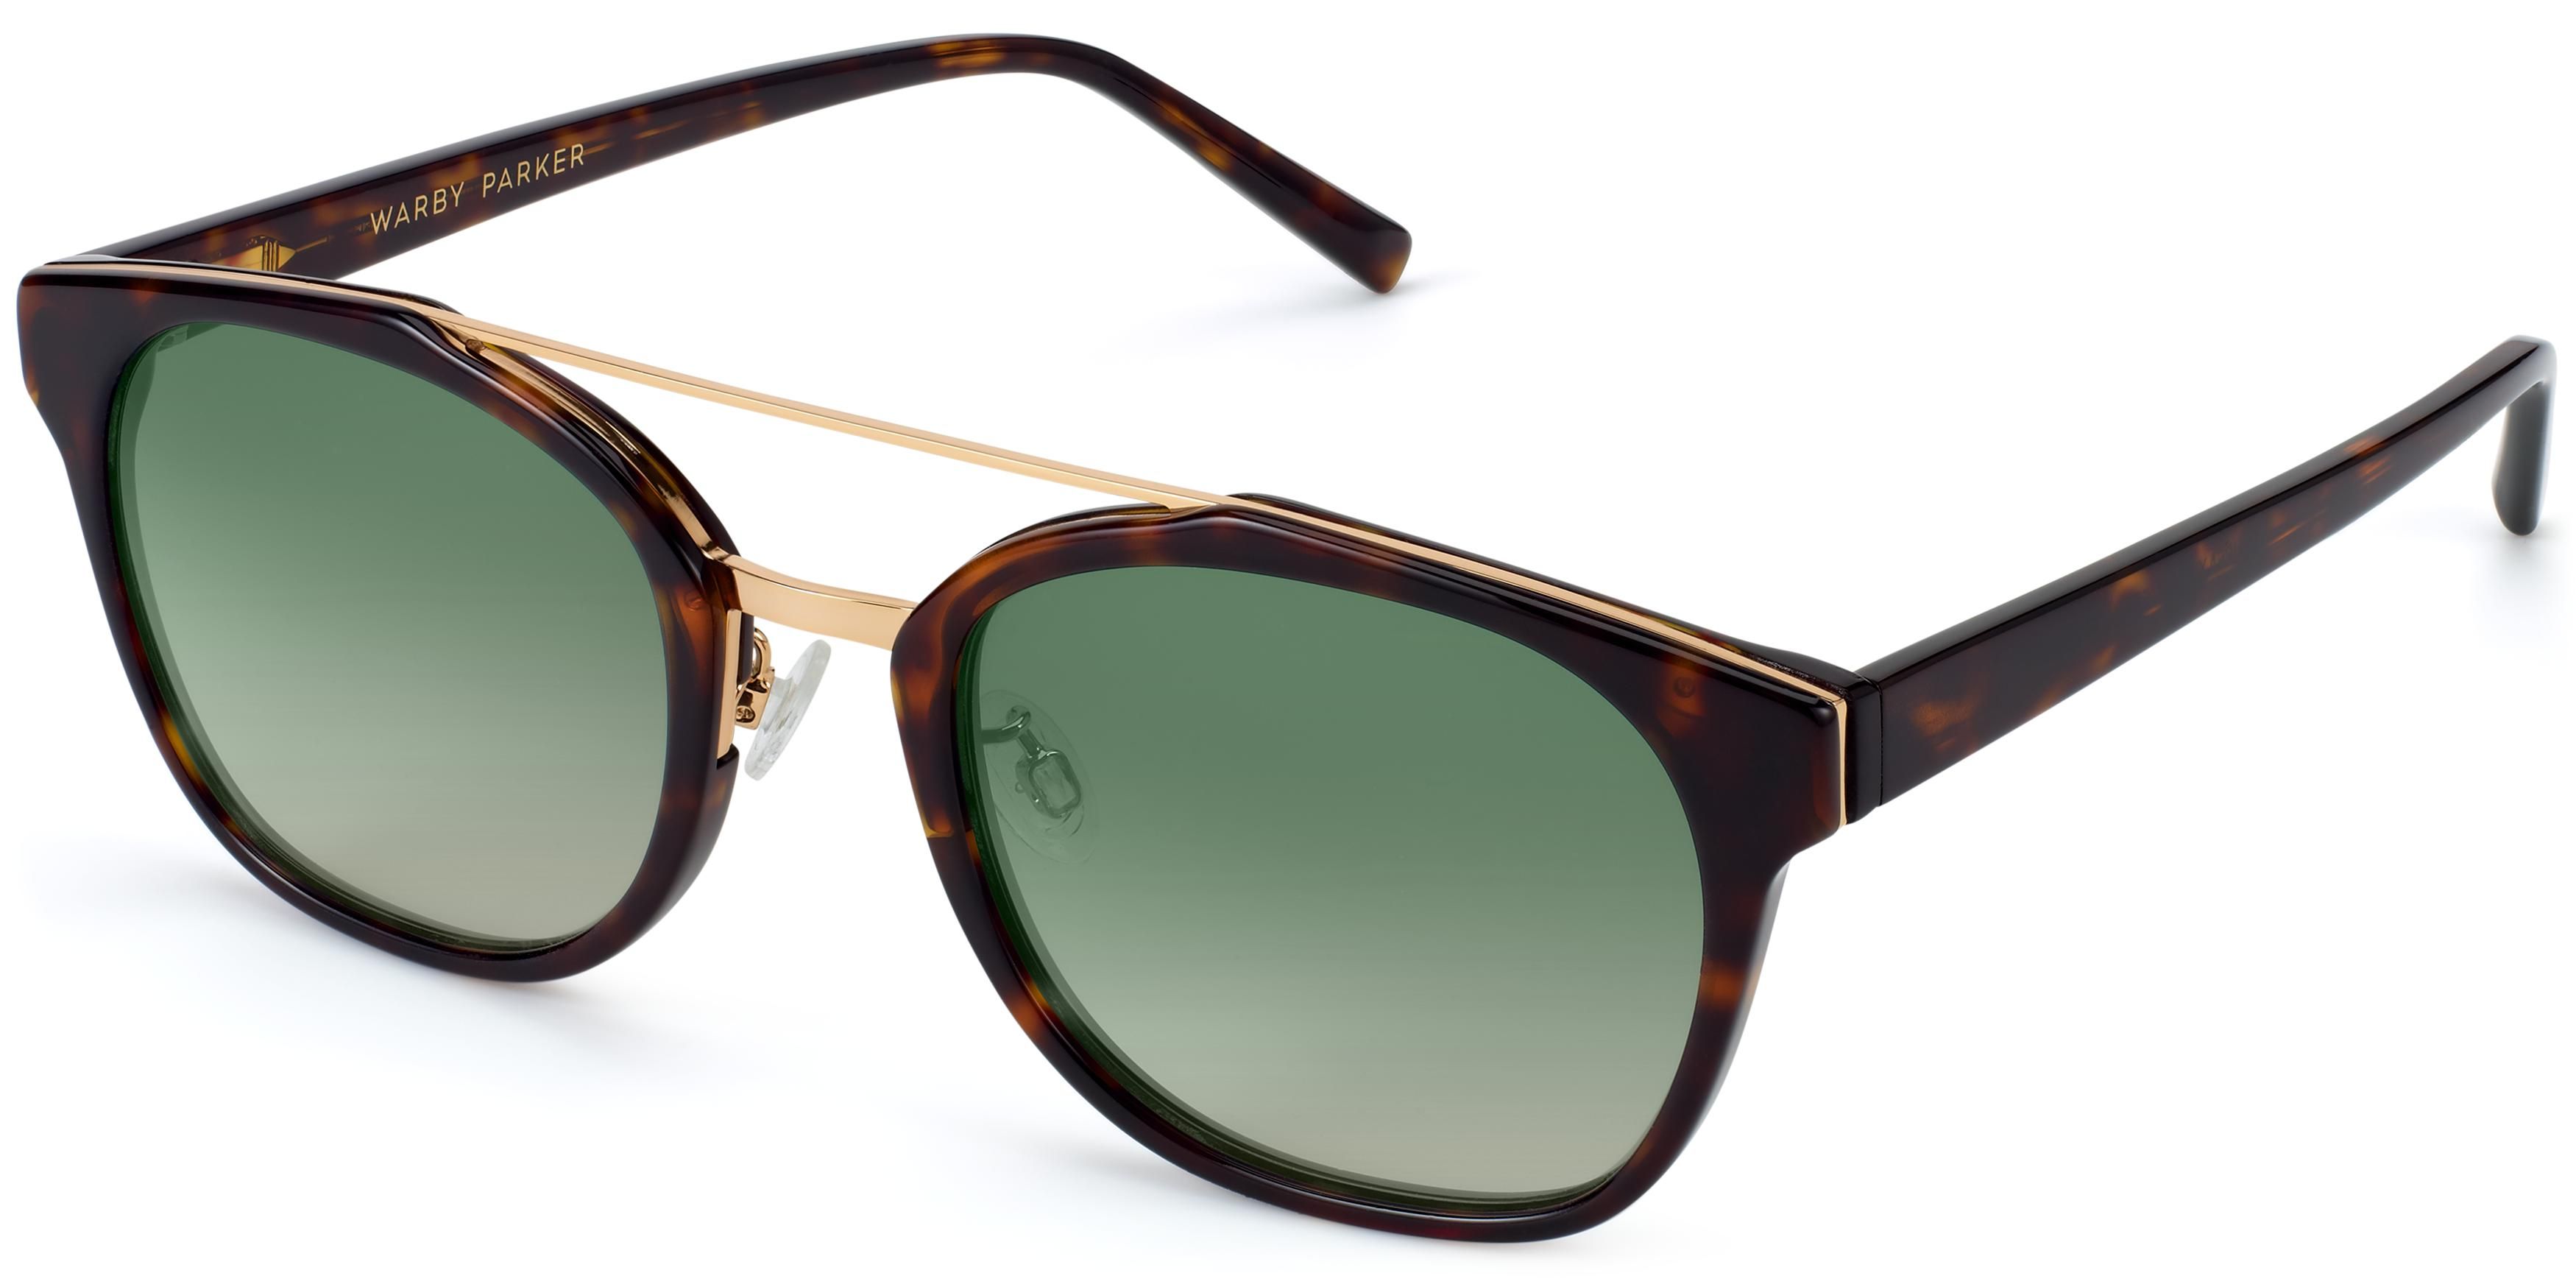 Fairfax Sunglasses in Cognac Tortoise with Polished Gold | Warby Parker | Warby Parker (US)